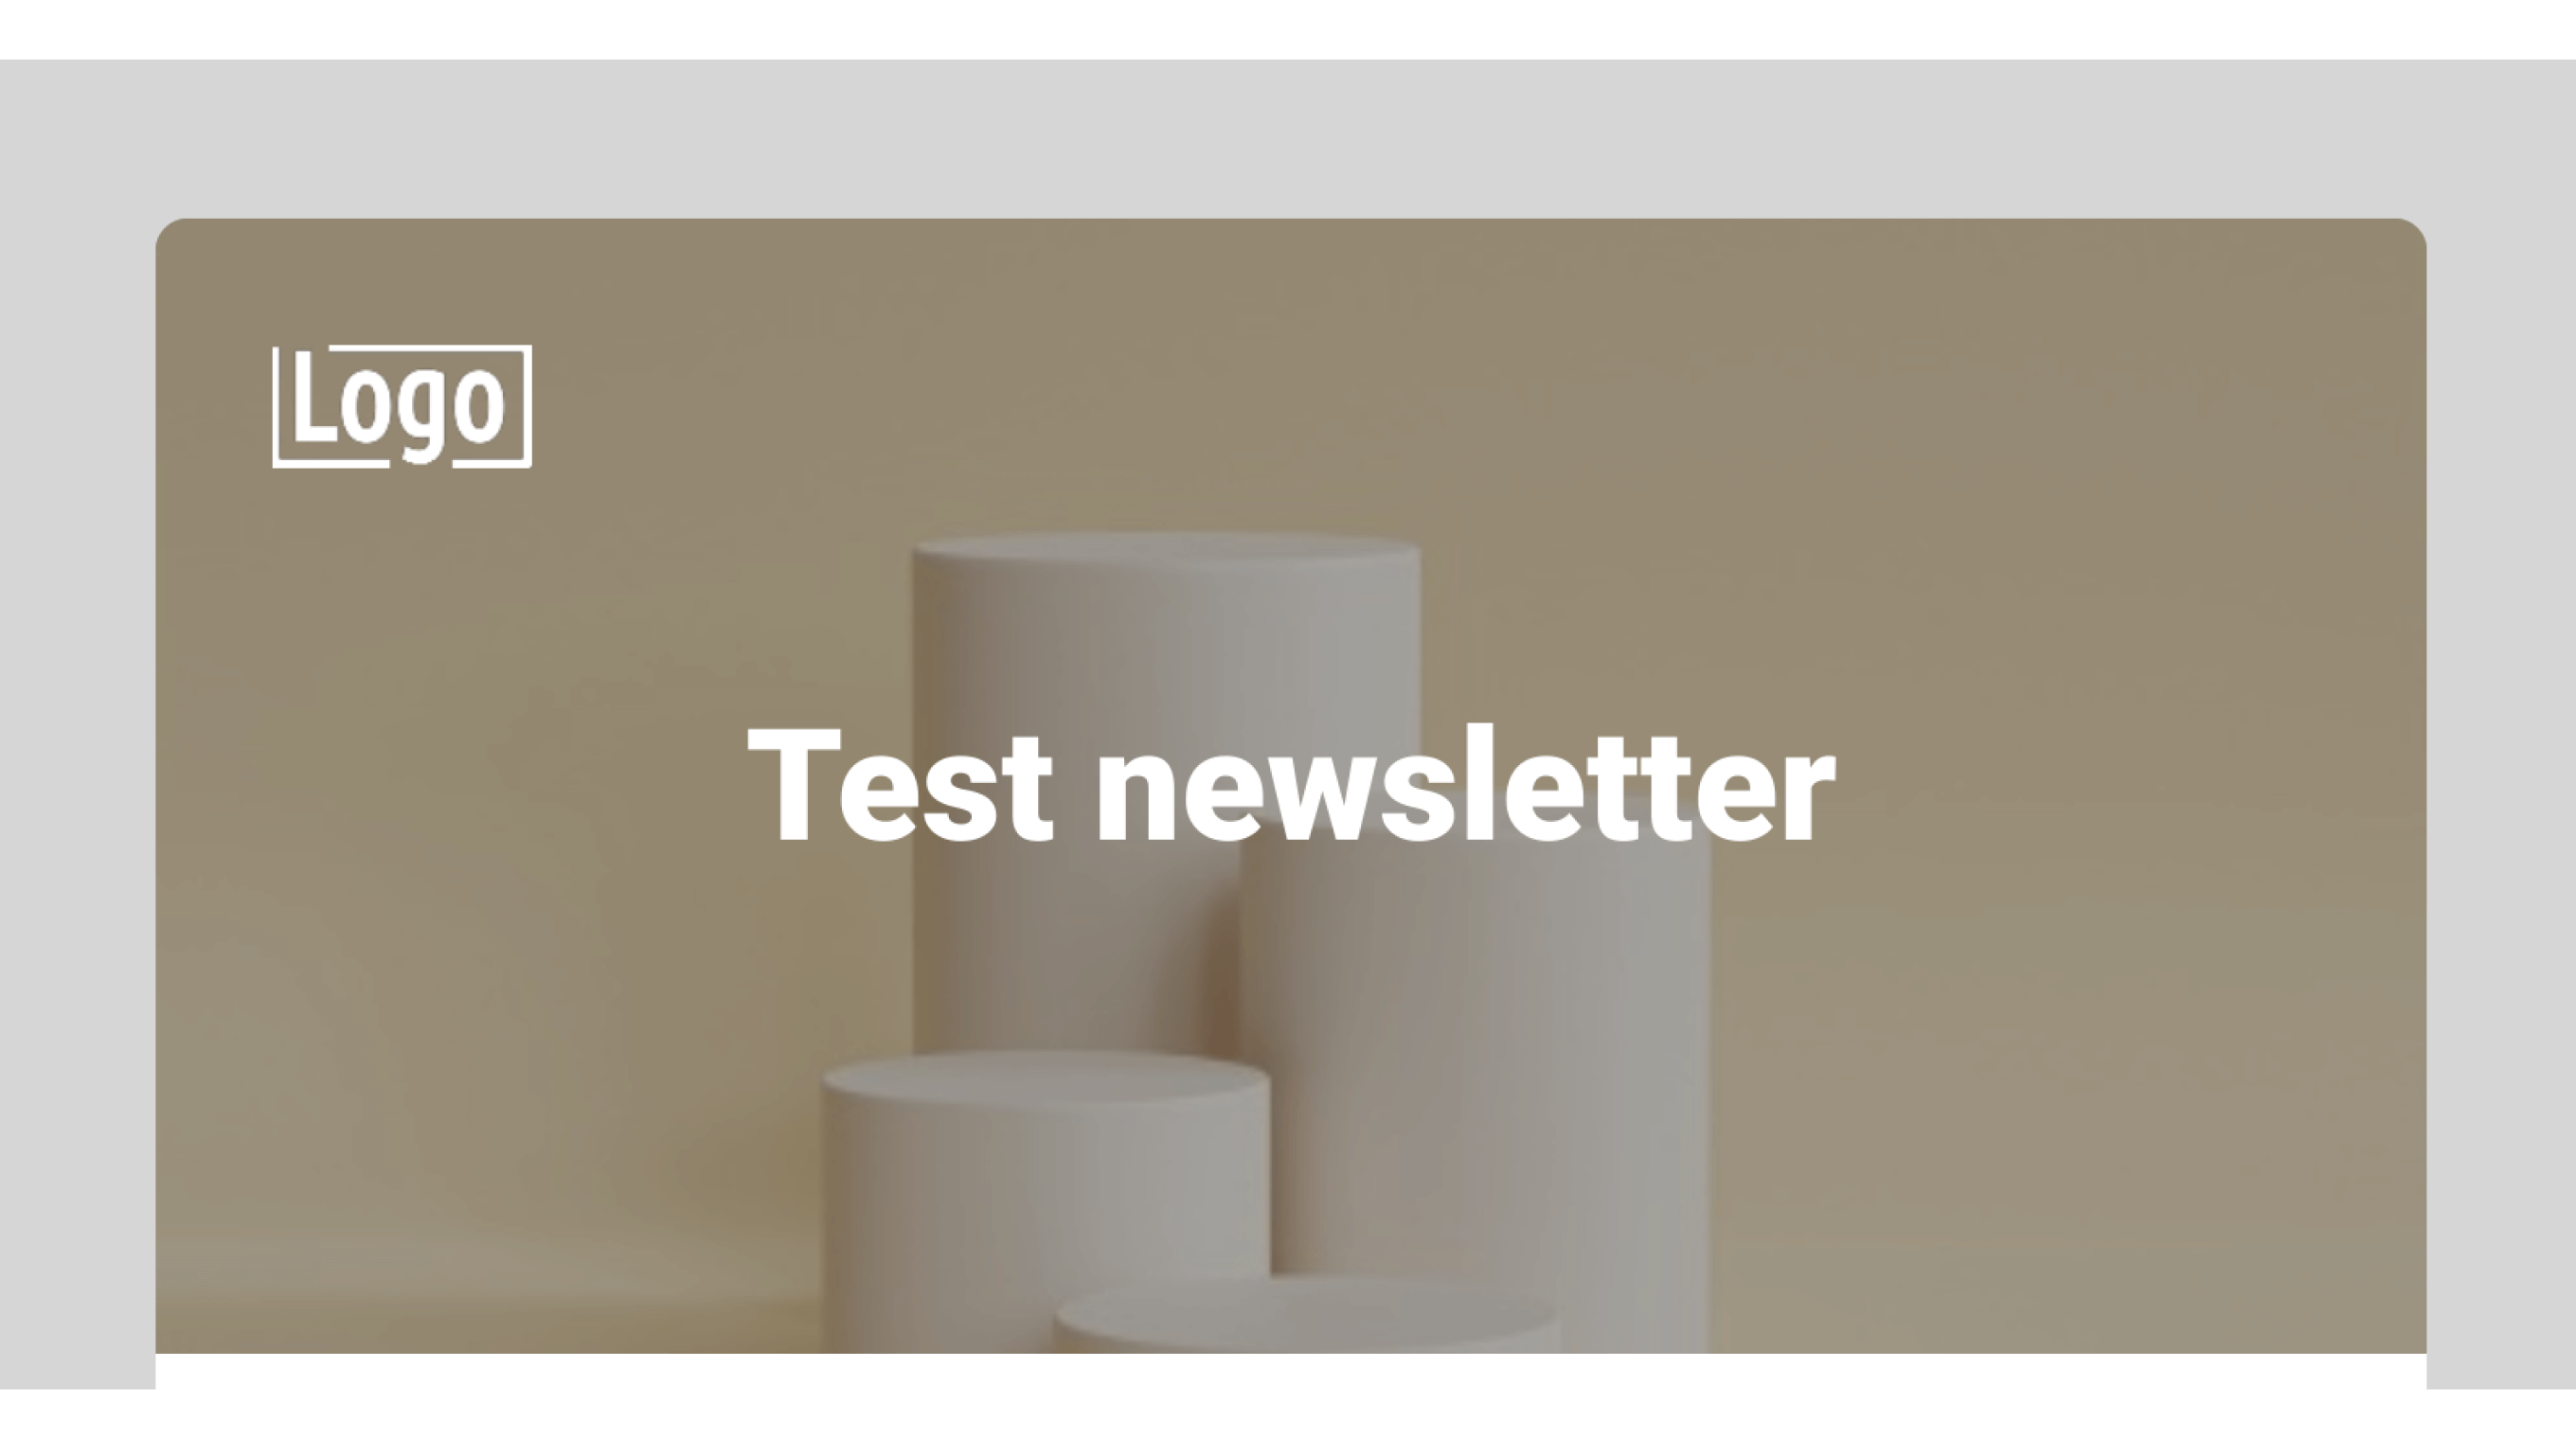 How to Use Drupal Layout Builder to Make Newsletters Look Good - Test Newsletter - Lemberg Solutions